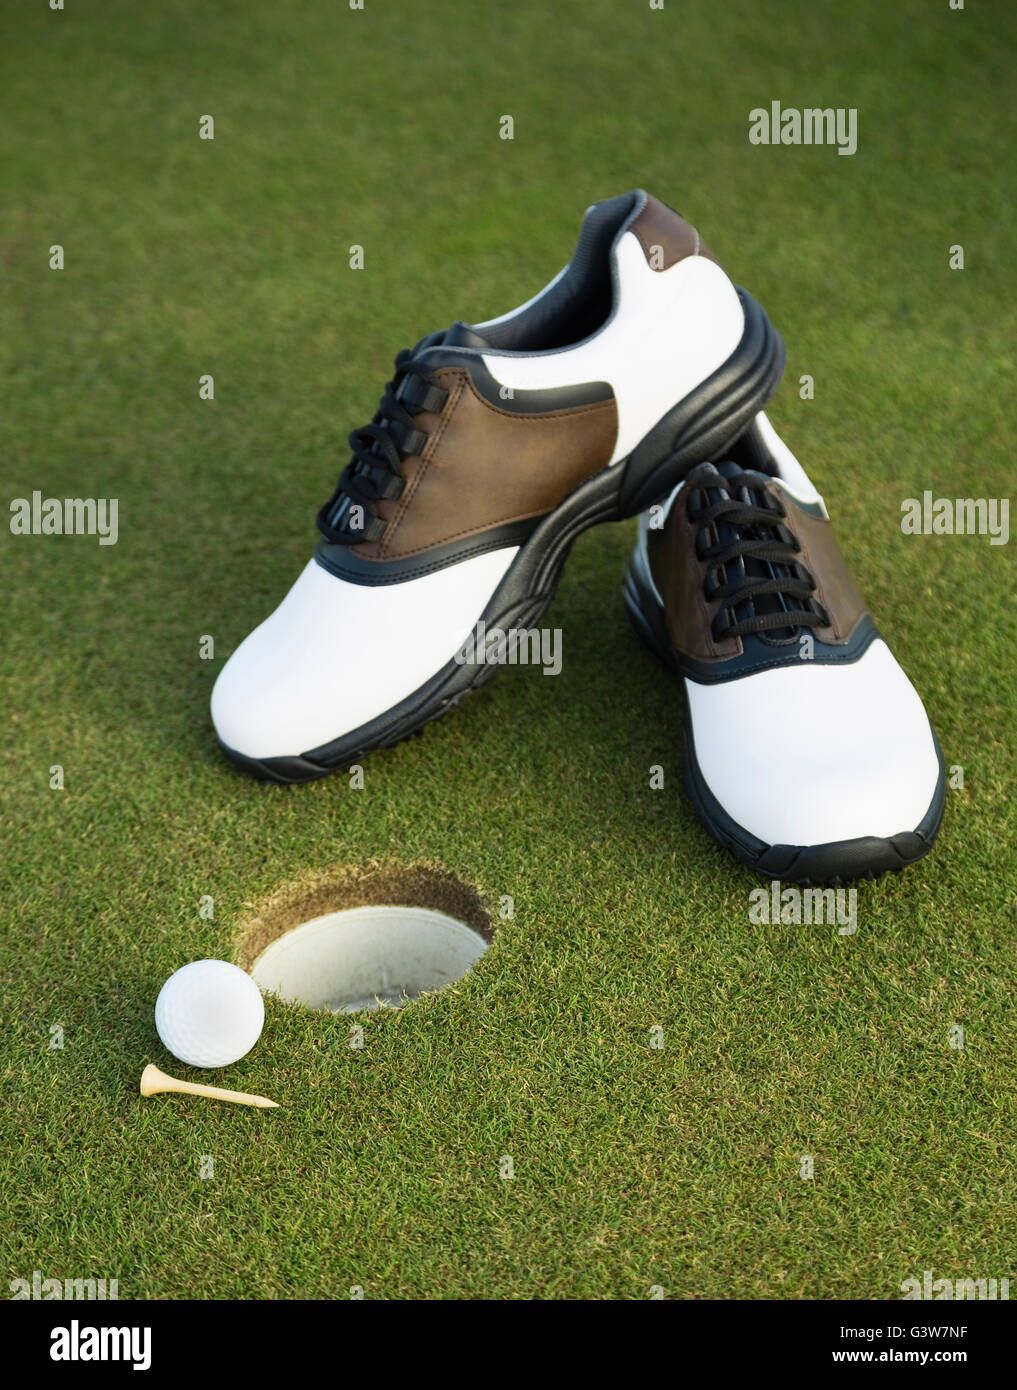 Golf shoes, ball and tee on golf course by hole Stock Photo